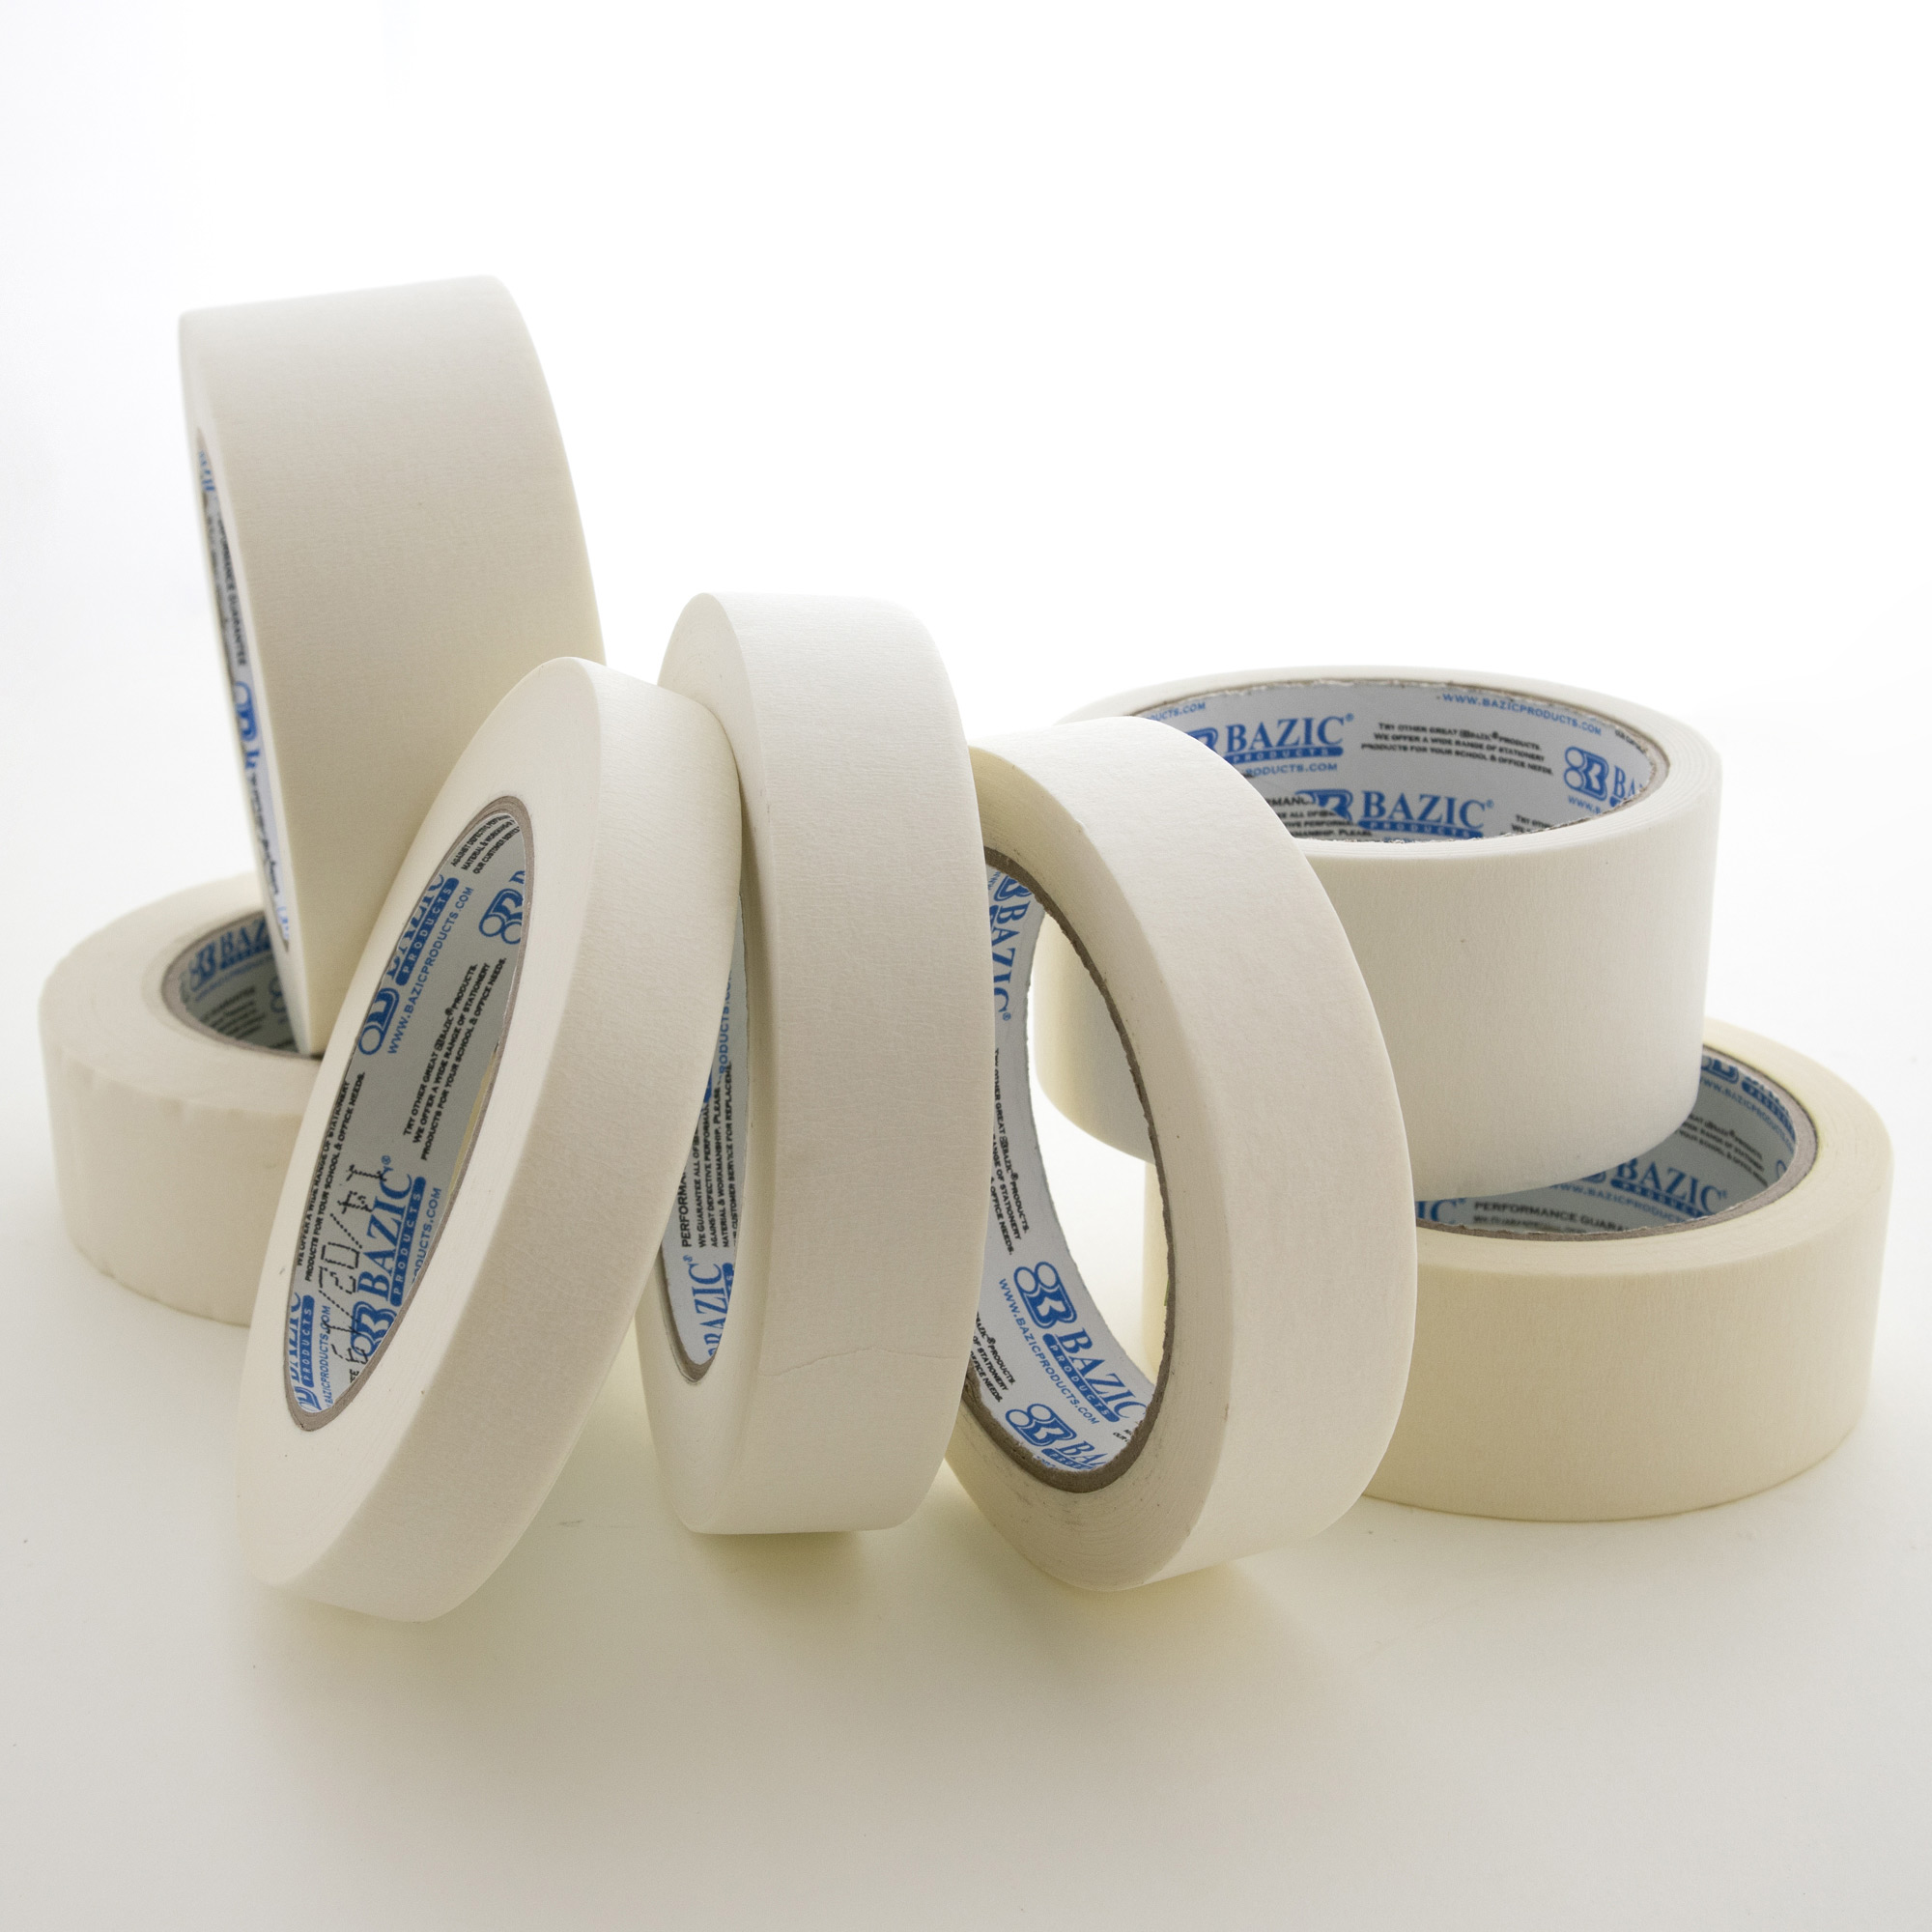 High Quality Masking Tape - PadNProtect 6-Roll Pack Masking Tape ($4.67/roll)